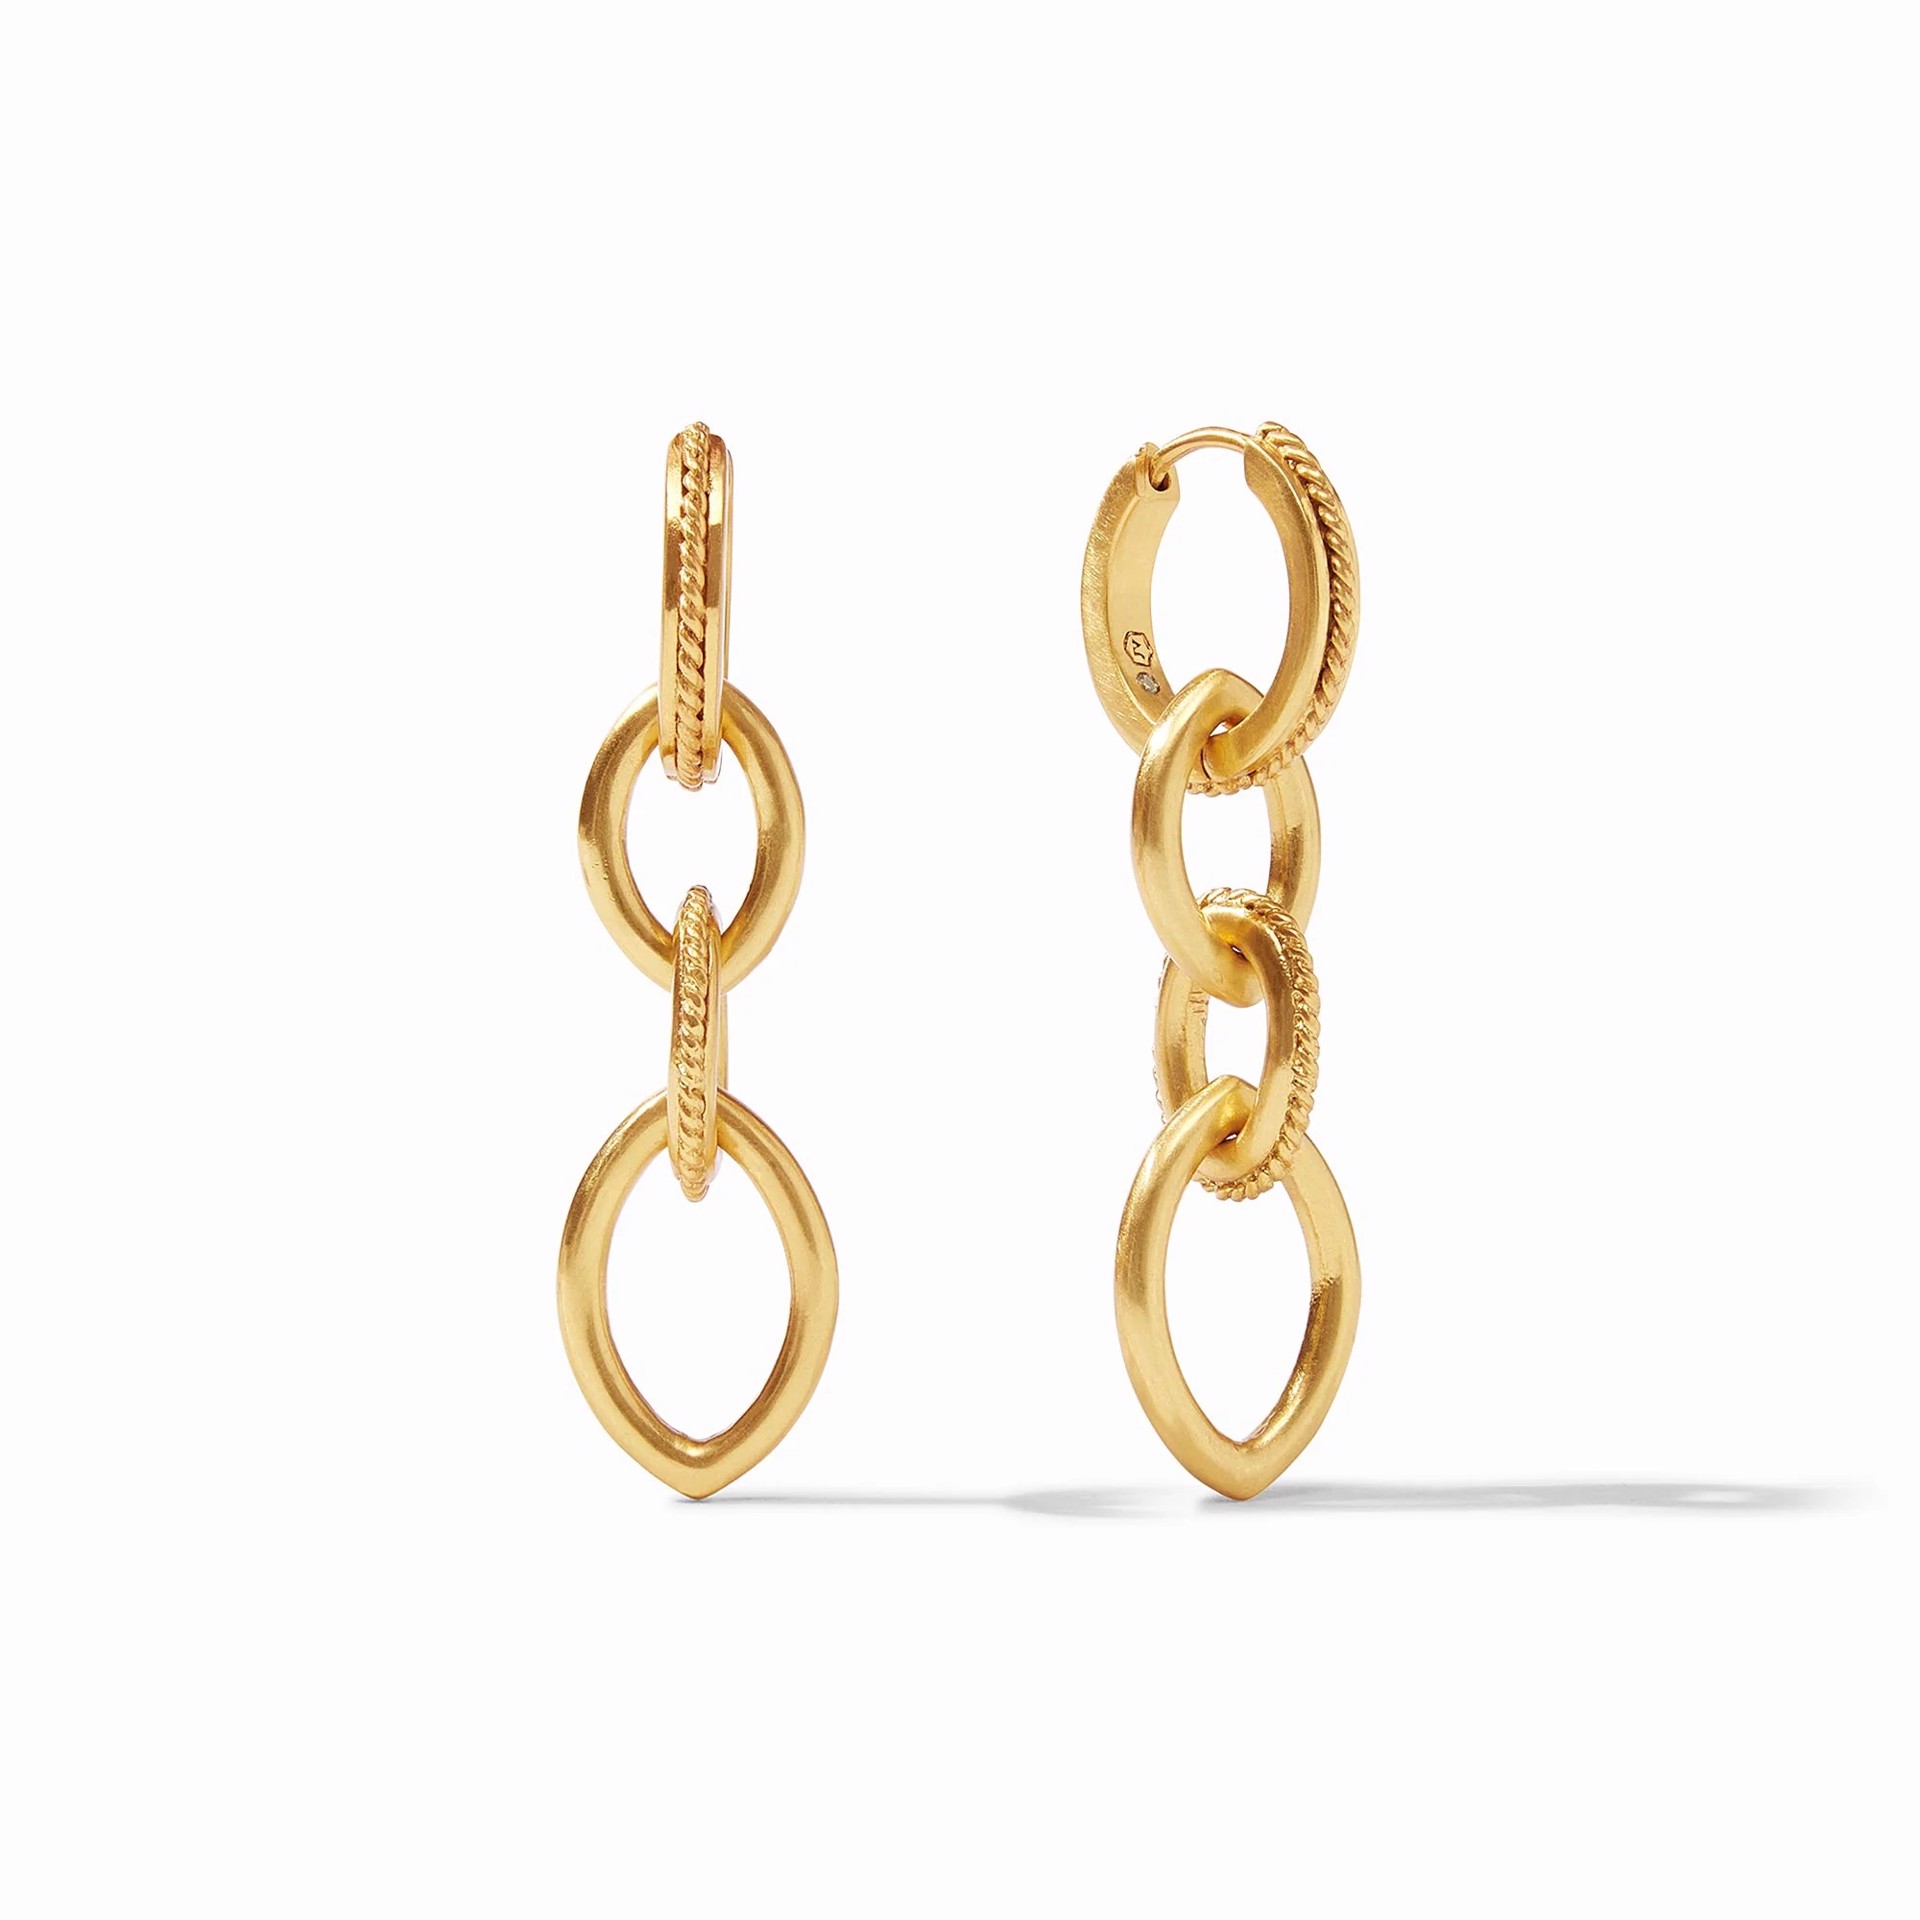 Delphine 2 in 1 Earring by Julie Vos